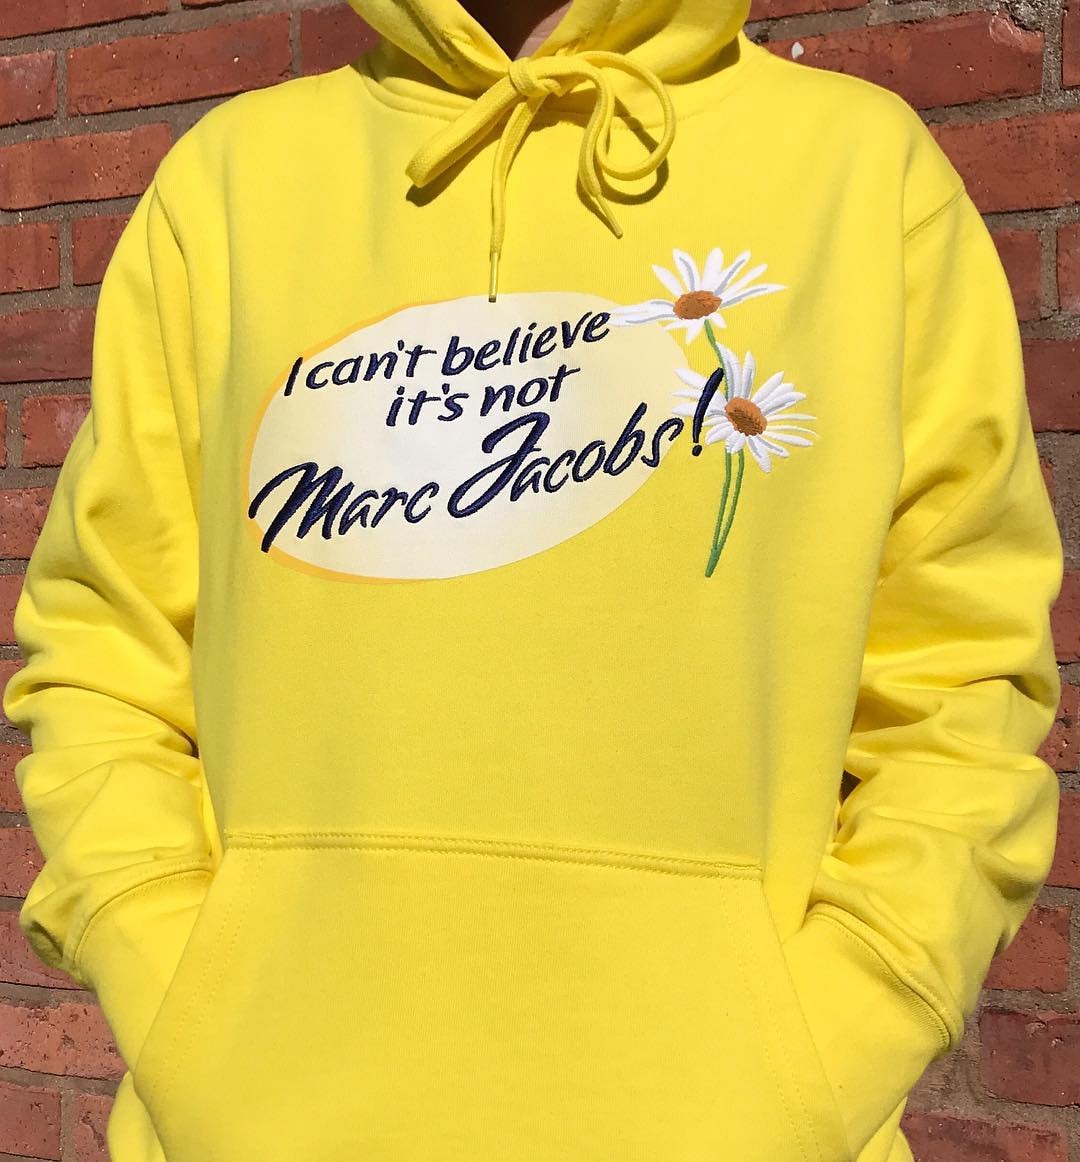 Ava Nirui Marc Jacobs Hoodie Collaboration November 1 2018 Yellow Bootleg Avanope I can't believe it's not fake butter